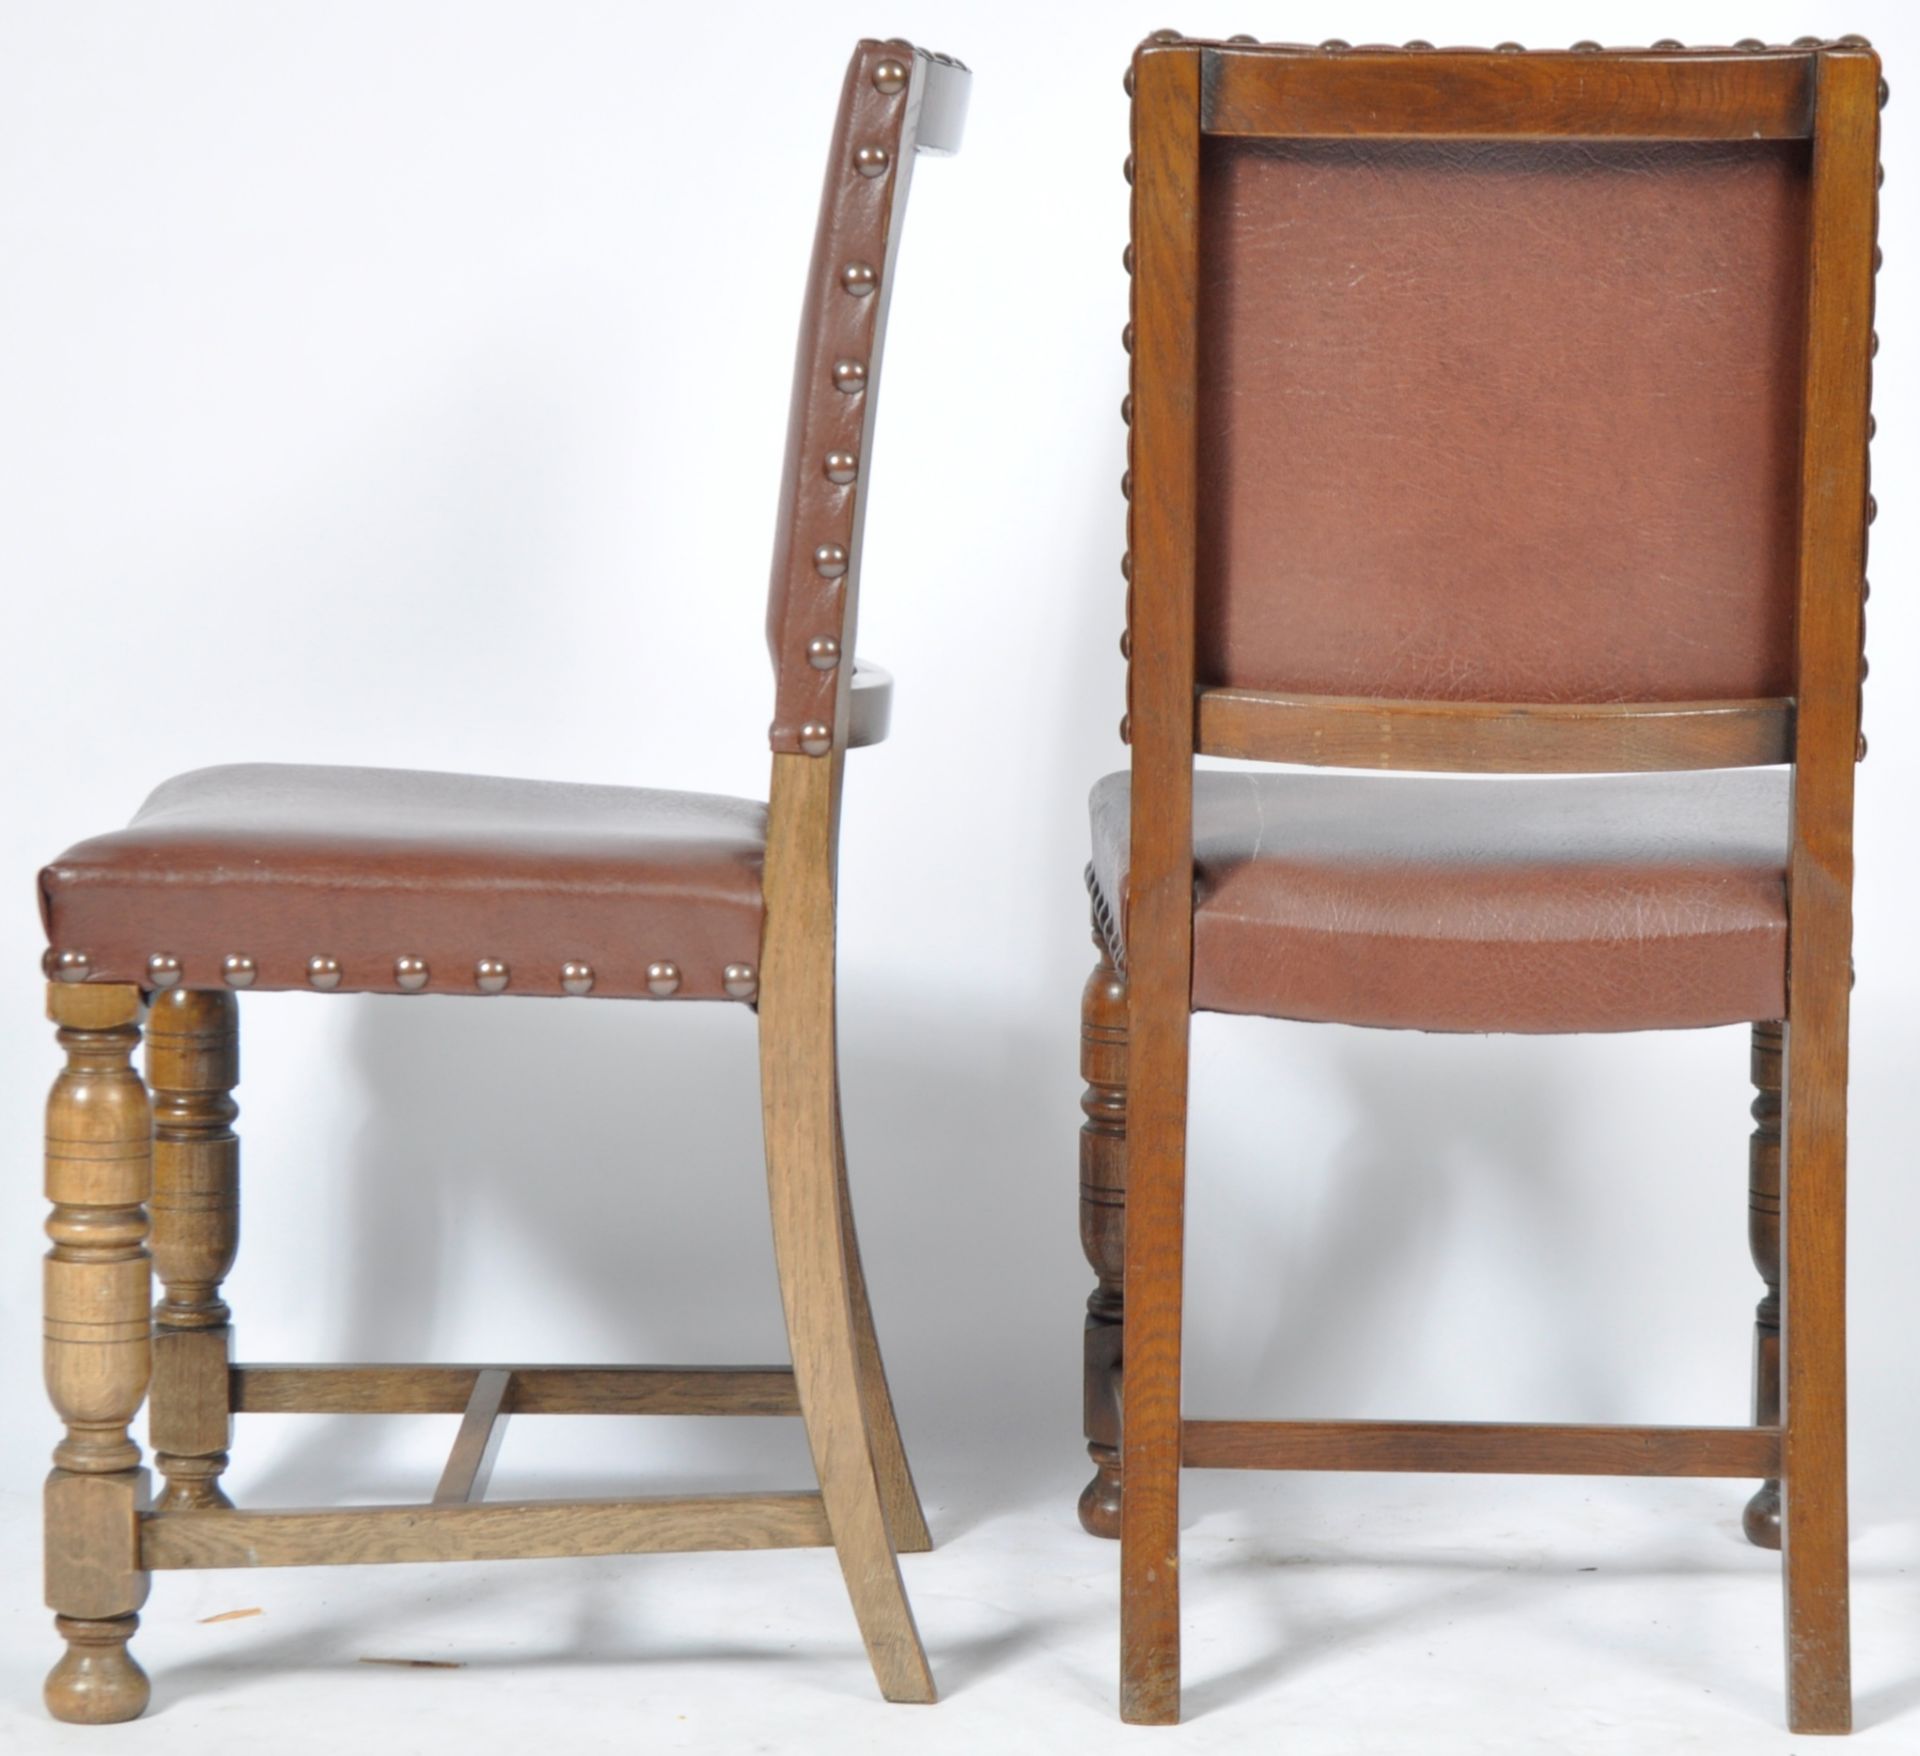 MATCHING SET OF TEN OAK AND LEATHERETTE DINING CHAIRS - Image 11 of 11